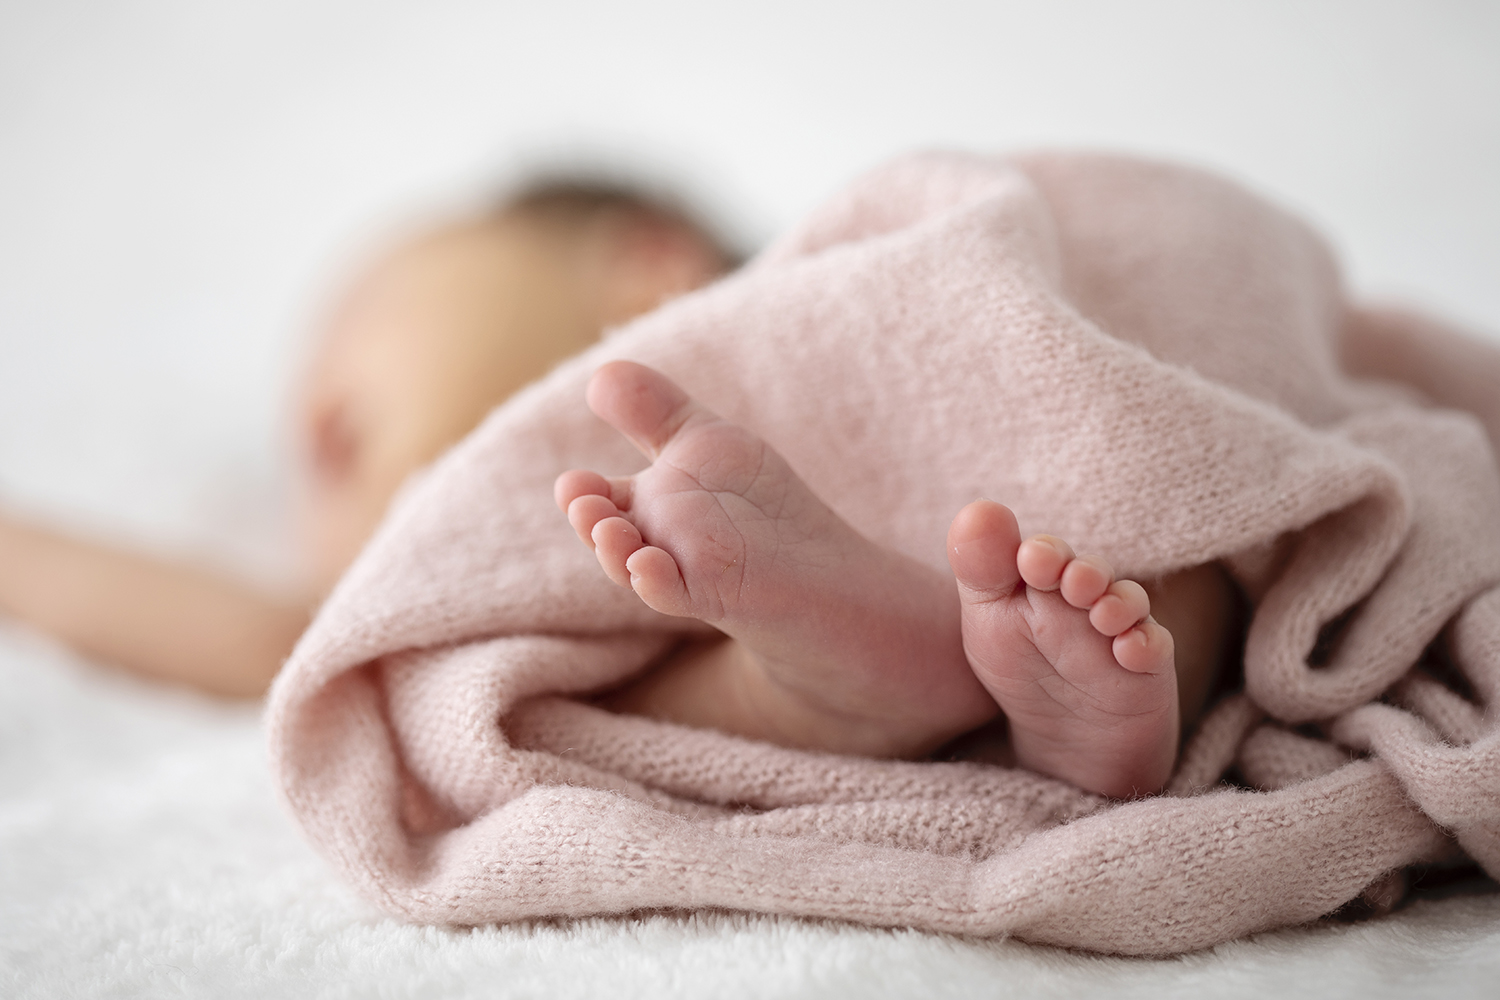 A close-up photograph of the toes and feet of a newborn baby